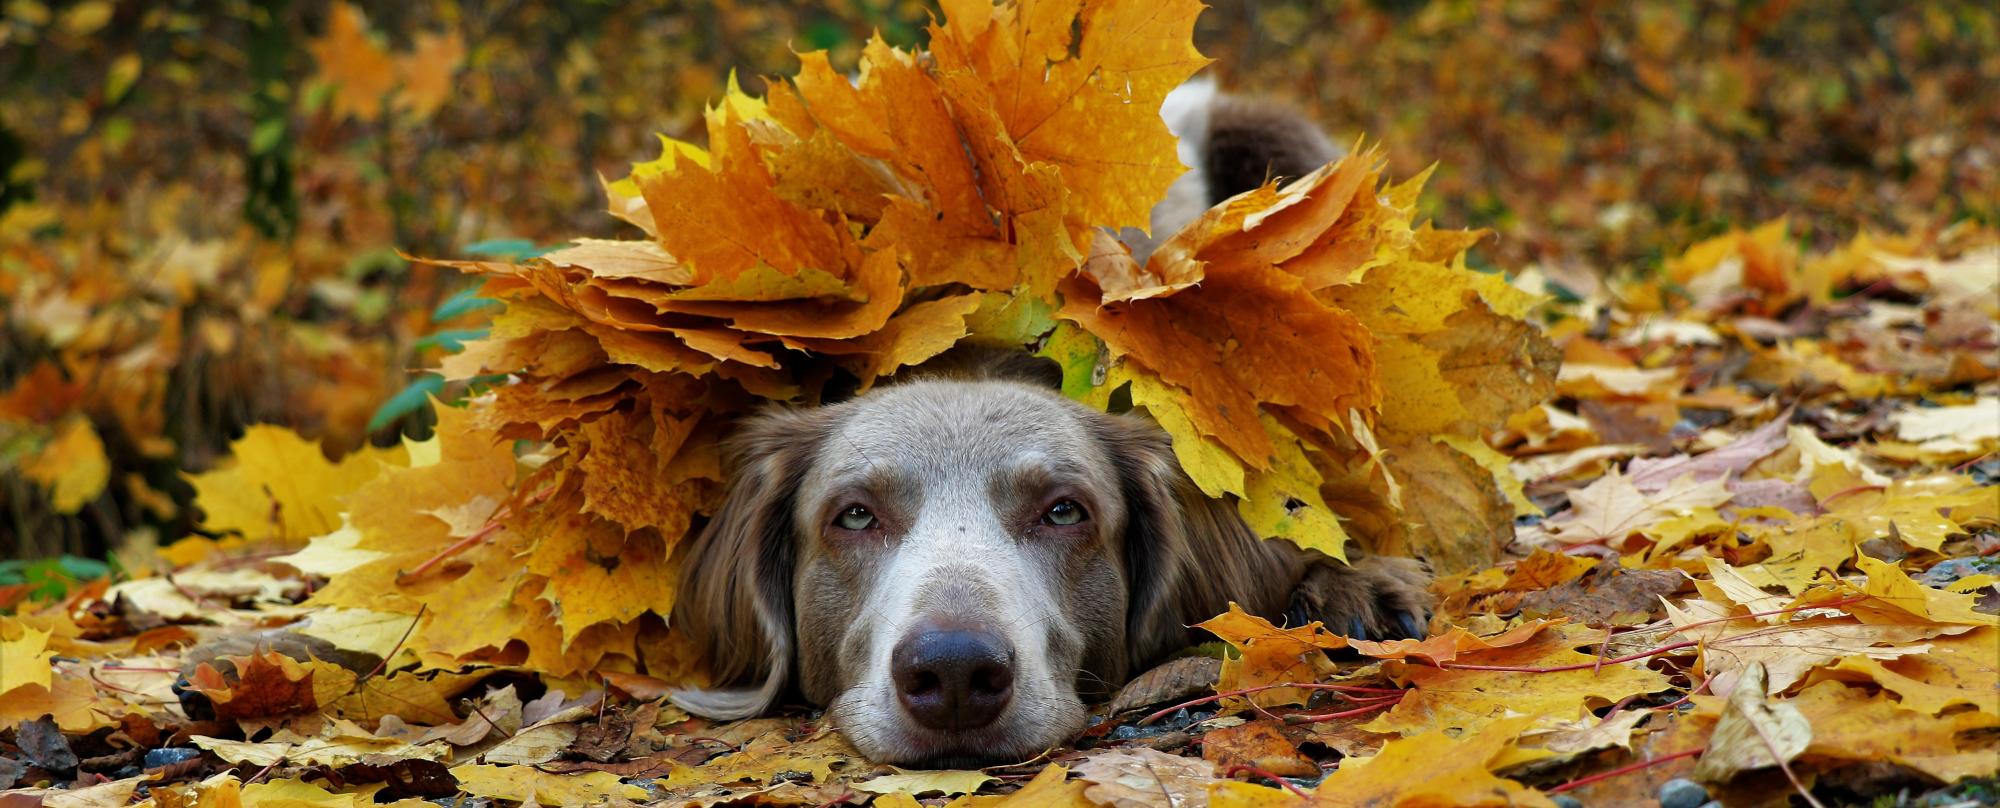 A Weimaraner lying in leaves